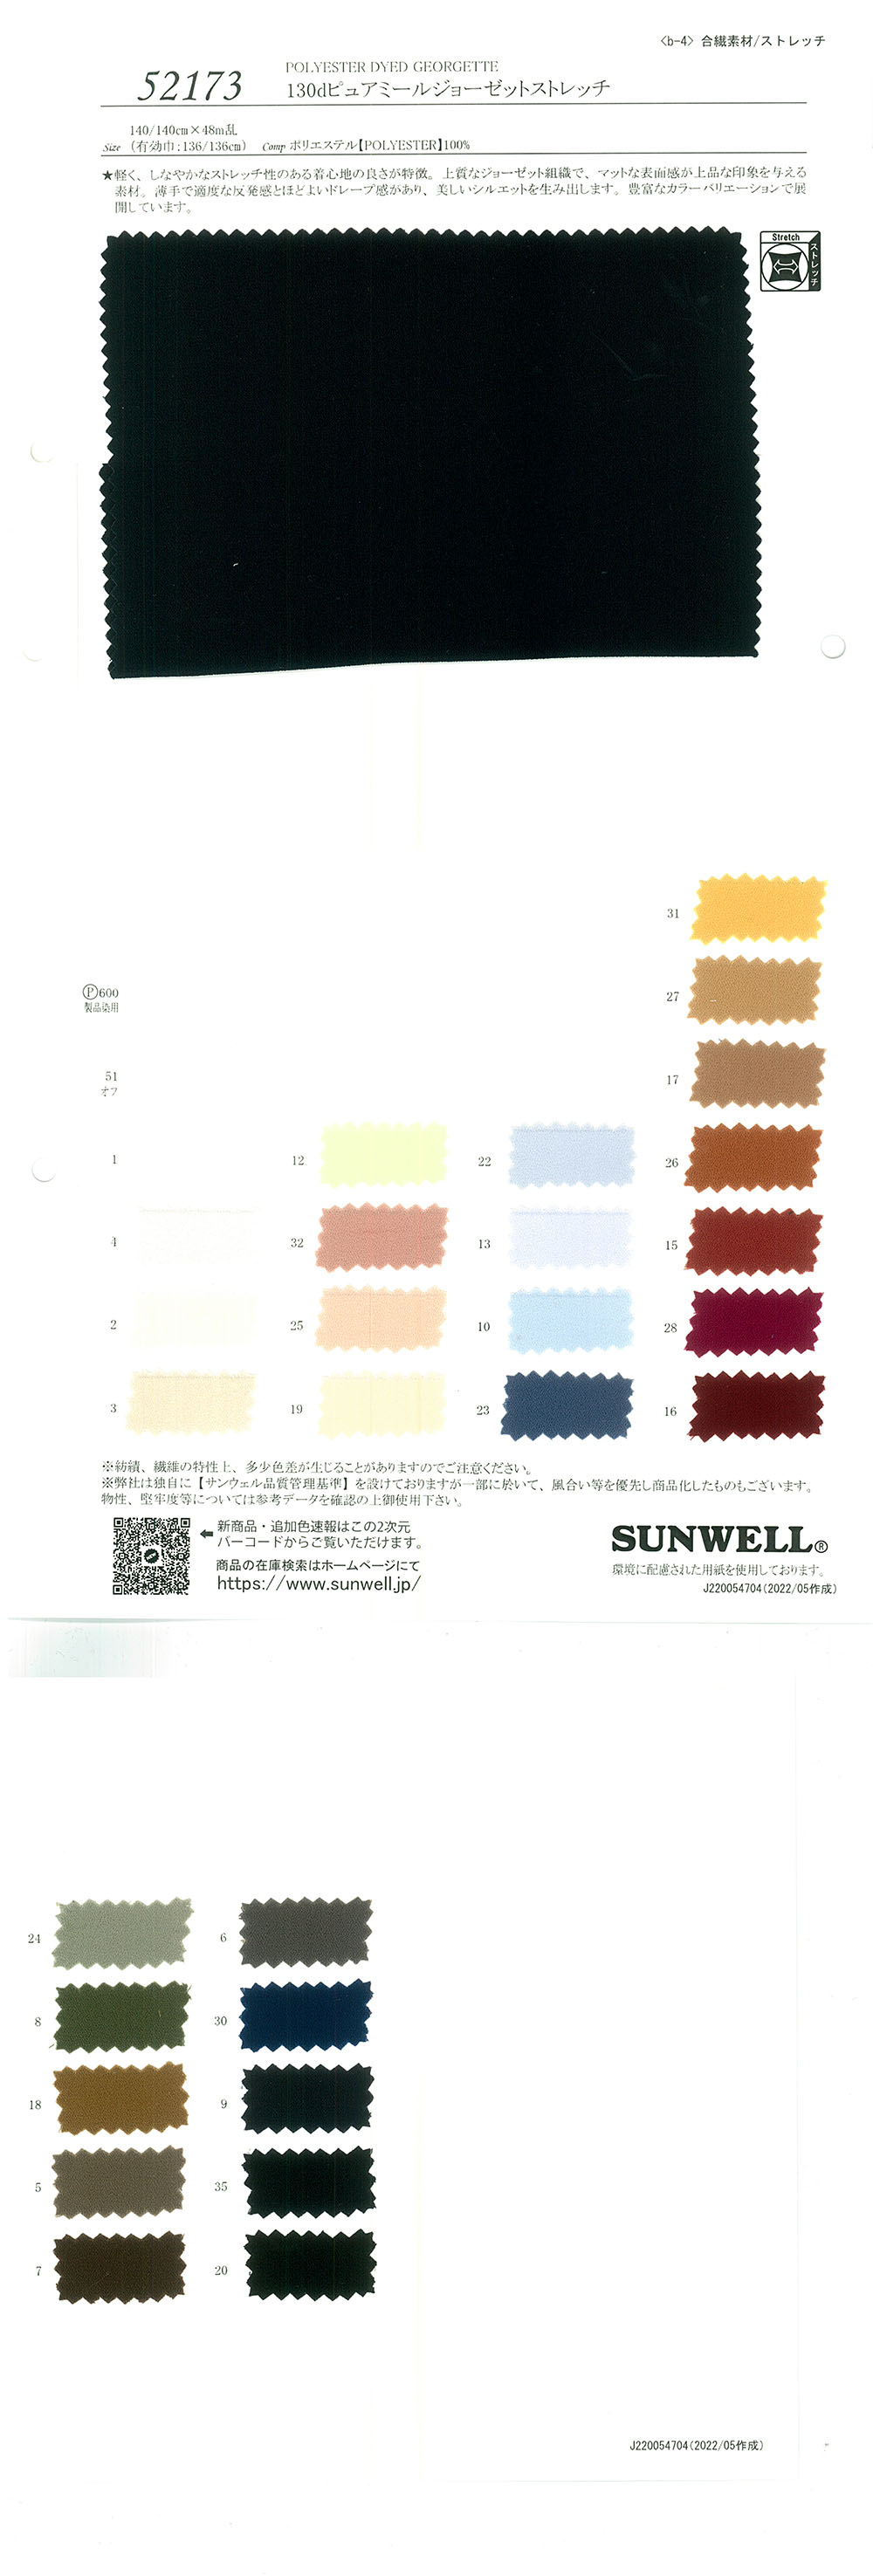 52173 130d Pure Meal Georgette Stretch[Fabrication De Textile] SUNWELL